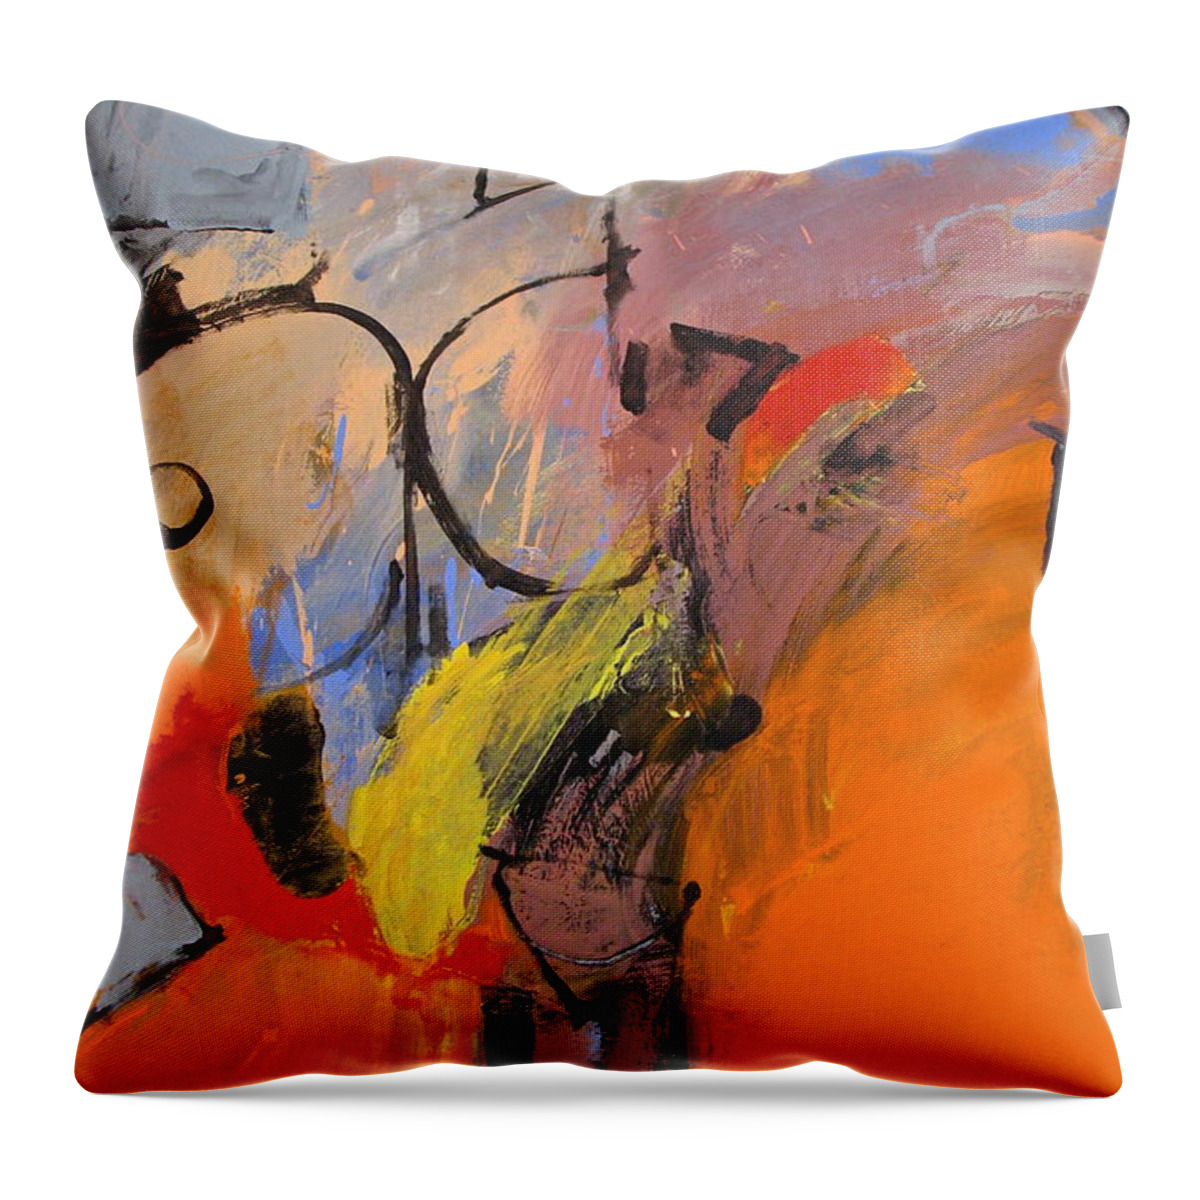 Abstract Painting Throw Pillow featuring the painting Cold Shoulder by Cliff Spohn